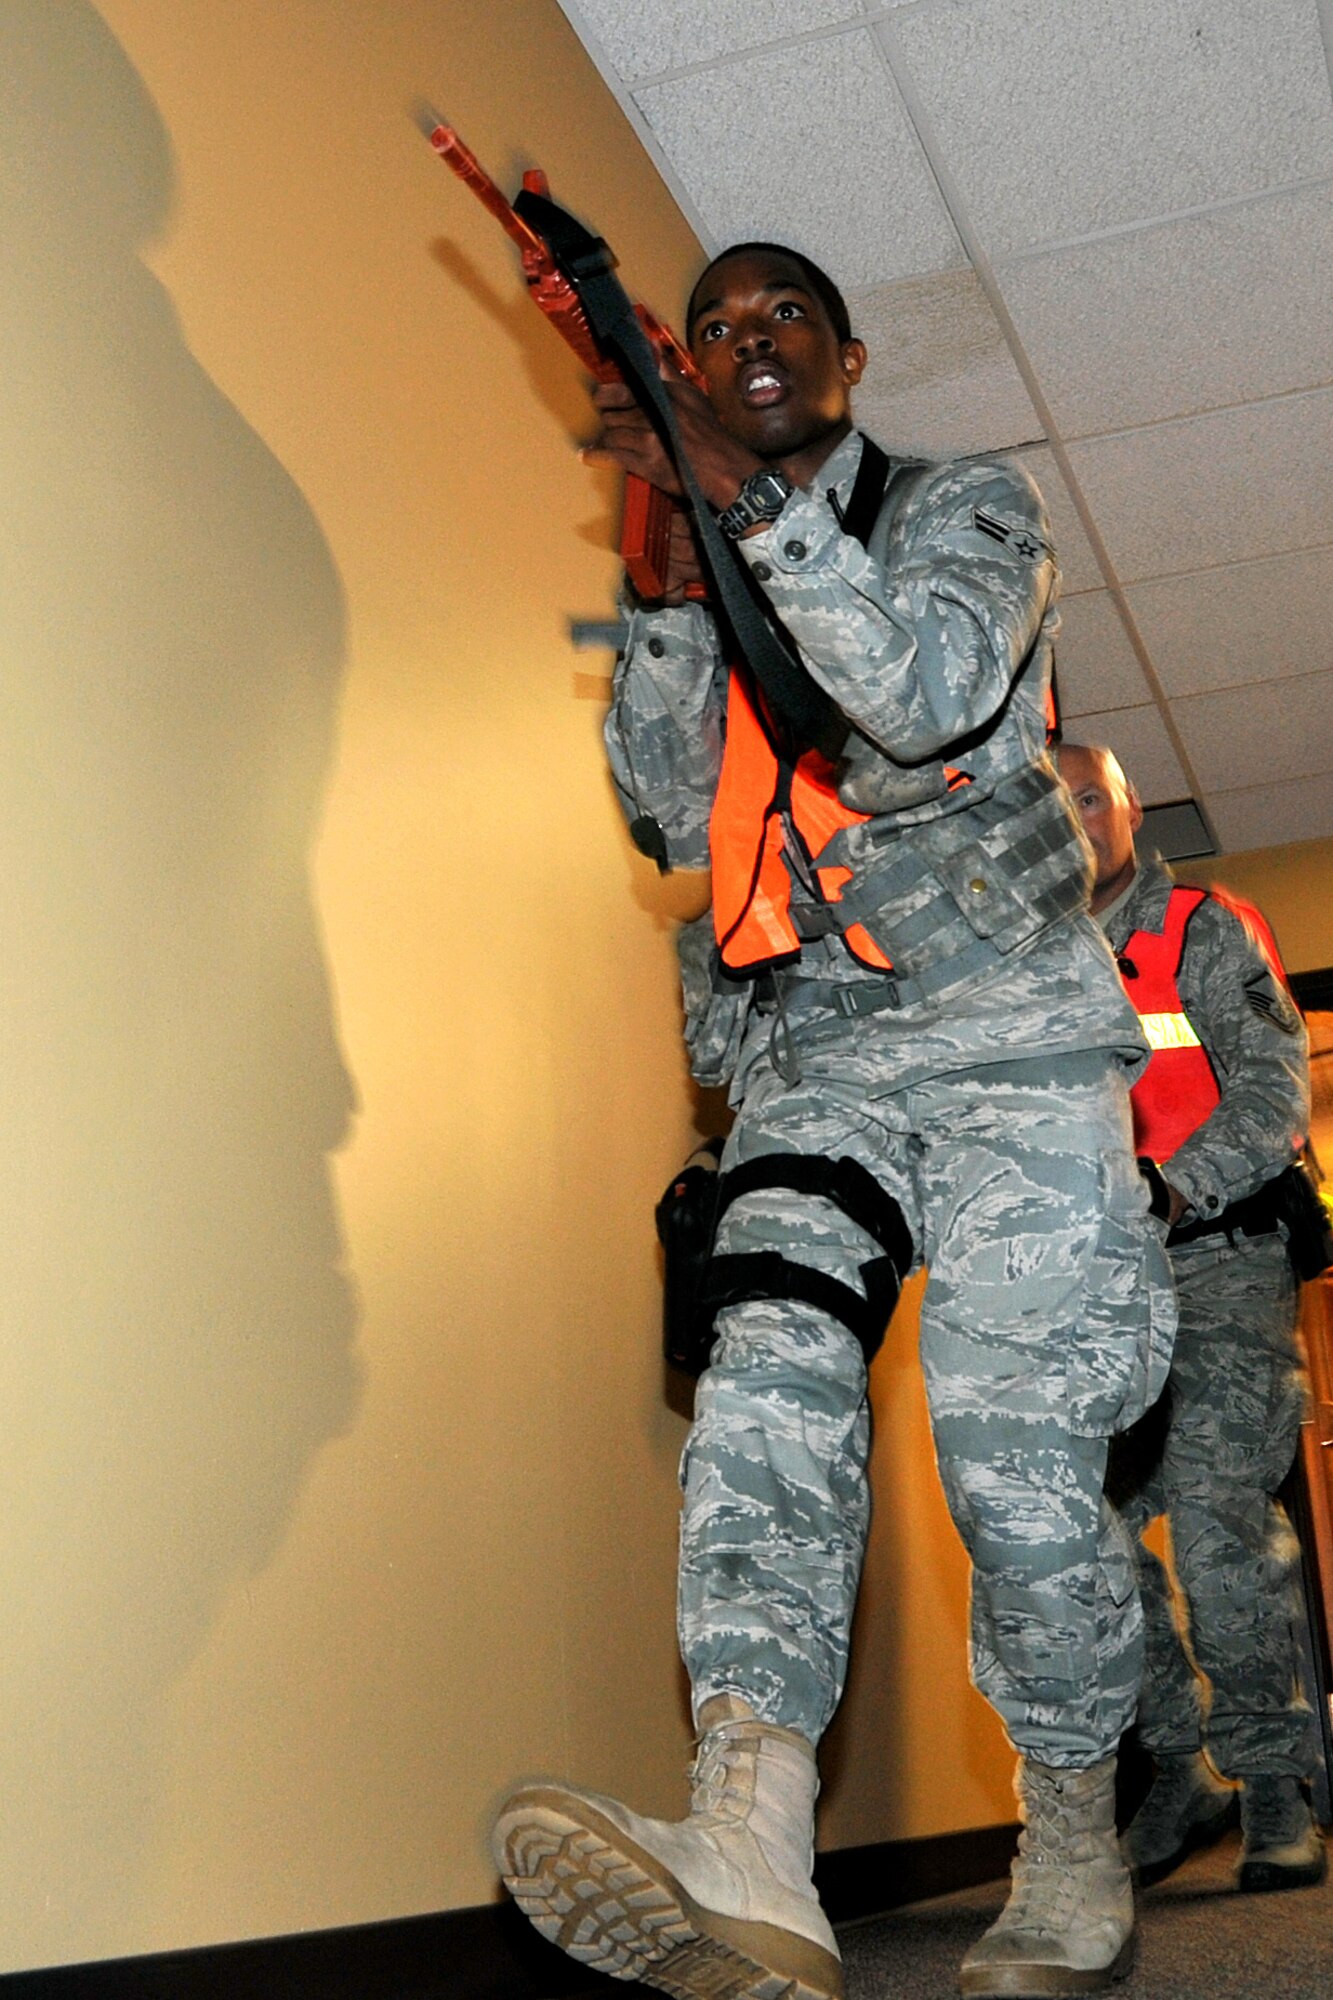 OFFUTT AIR FORCE BASE, Neb. - Airman 1st Class Randy Dotson, 55th Security Forces Squadron, follows teammates down a hallway in the base's main customer support building.  Team Offutt's first responders conduct various exercise scenarios throughout the year to prepare for possible threats to people and resources. U.S. Air Force photo by Jeff W. Gates